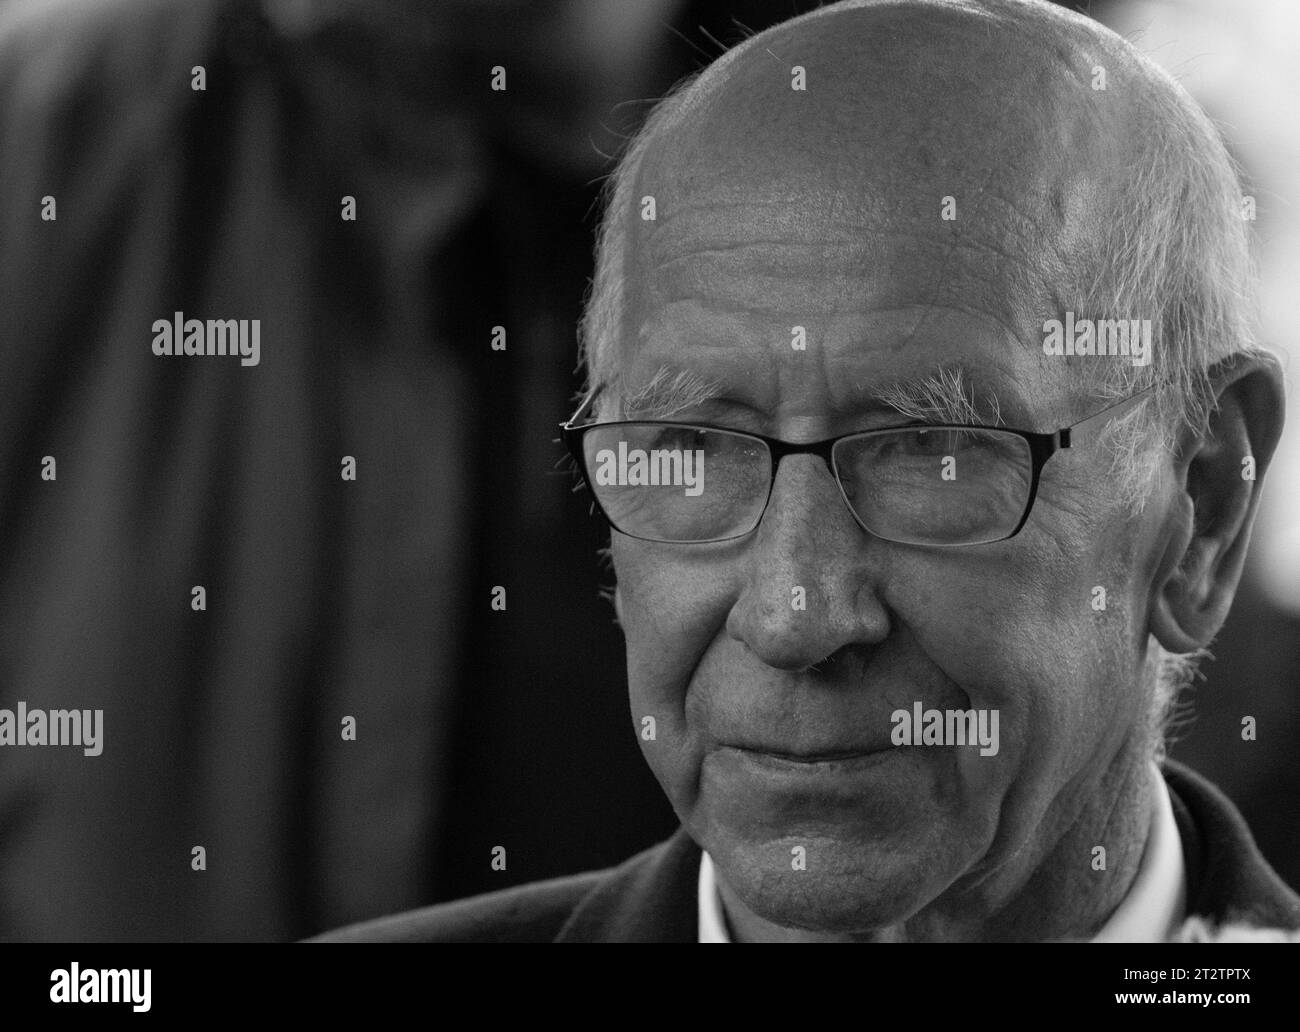 BOBBY CHARLTON MANCHESTER UNITED AND ENGLAND FOOTBALL LEGEND. 1st October 2016 (10 days before his 80th Birthday), Bobby came in the pouring rain to unveil the Duncan Edwards plaque in Priory Park Dudley. He was very gracious coming out a second time to meet fans and sign autographs. Stock Photo